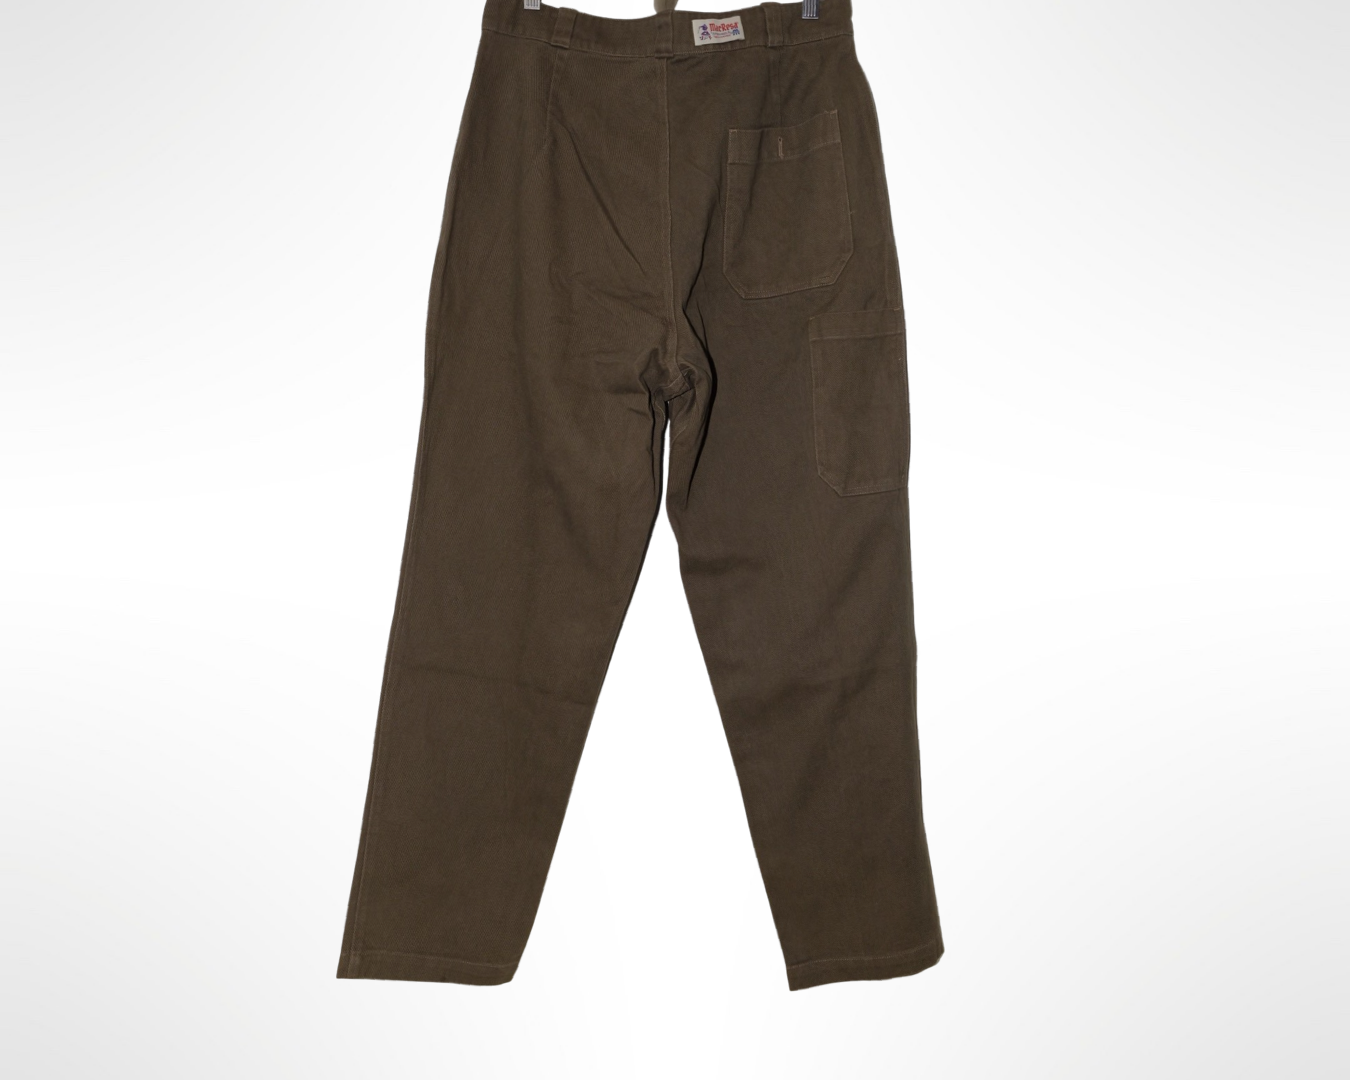 twill chore pants in earth